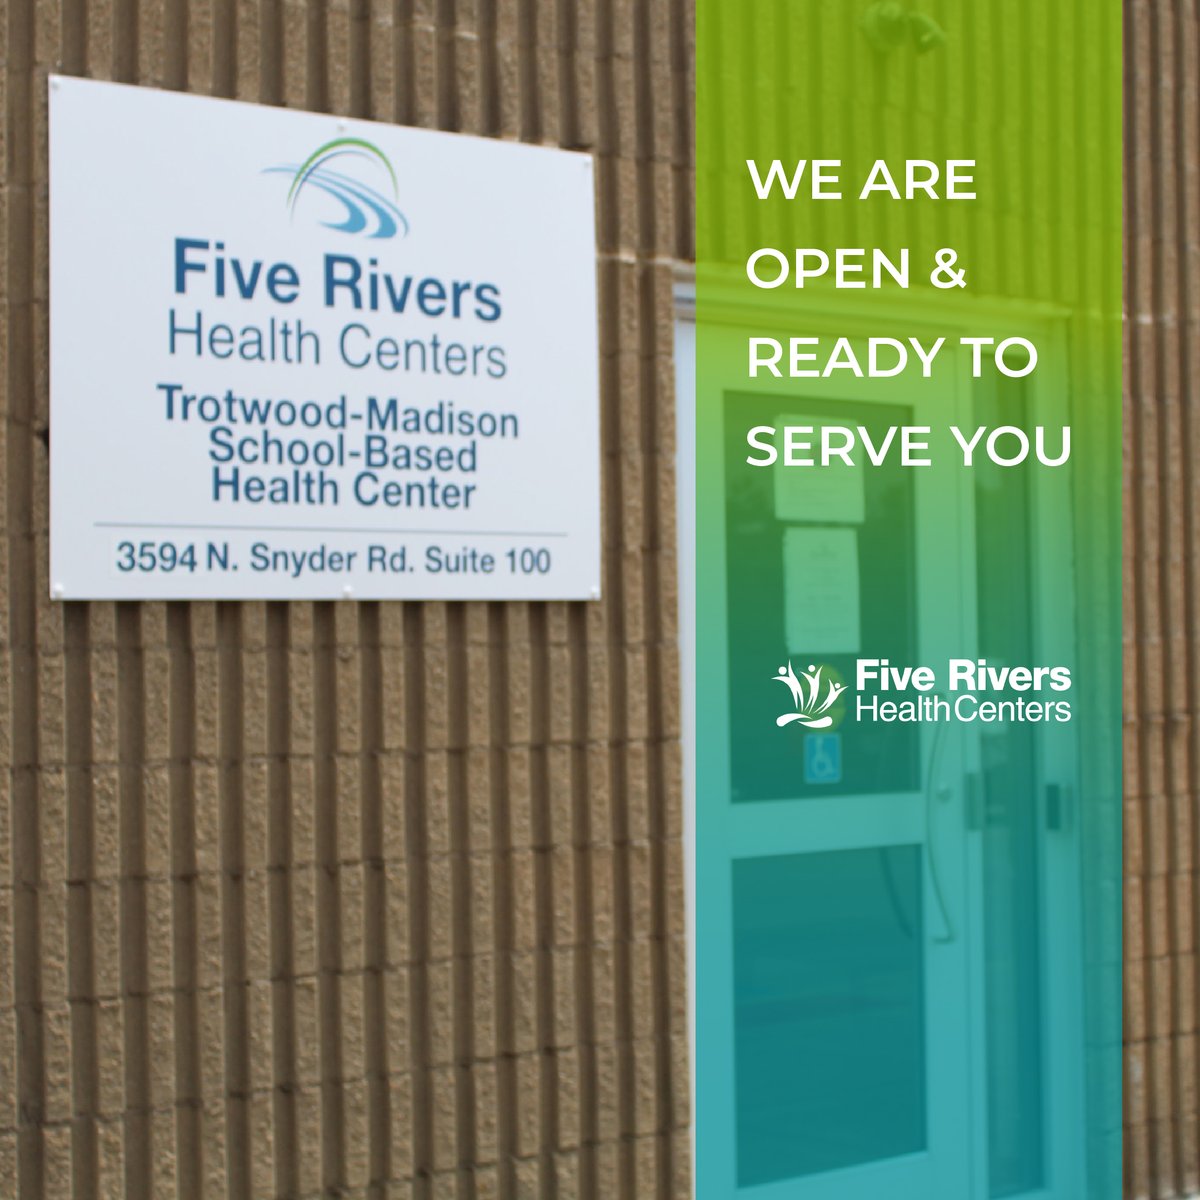 We currently have TWO School-Based Health Centers Dayton and Trotwood-Madison. We are open and ready to see patients for immunizations, vision screenings, and well-child checks.
 
#healthcenter #healthcare #schools #wereopen #careprovider